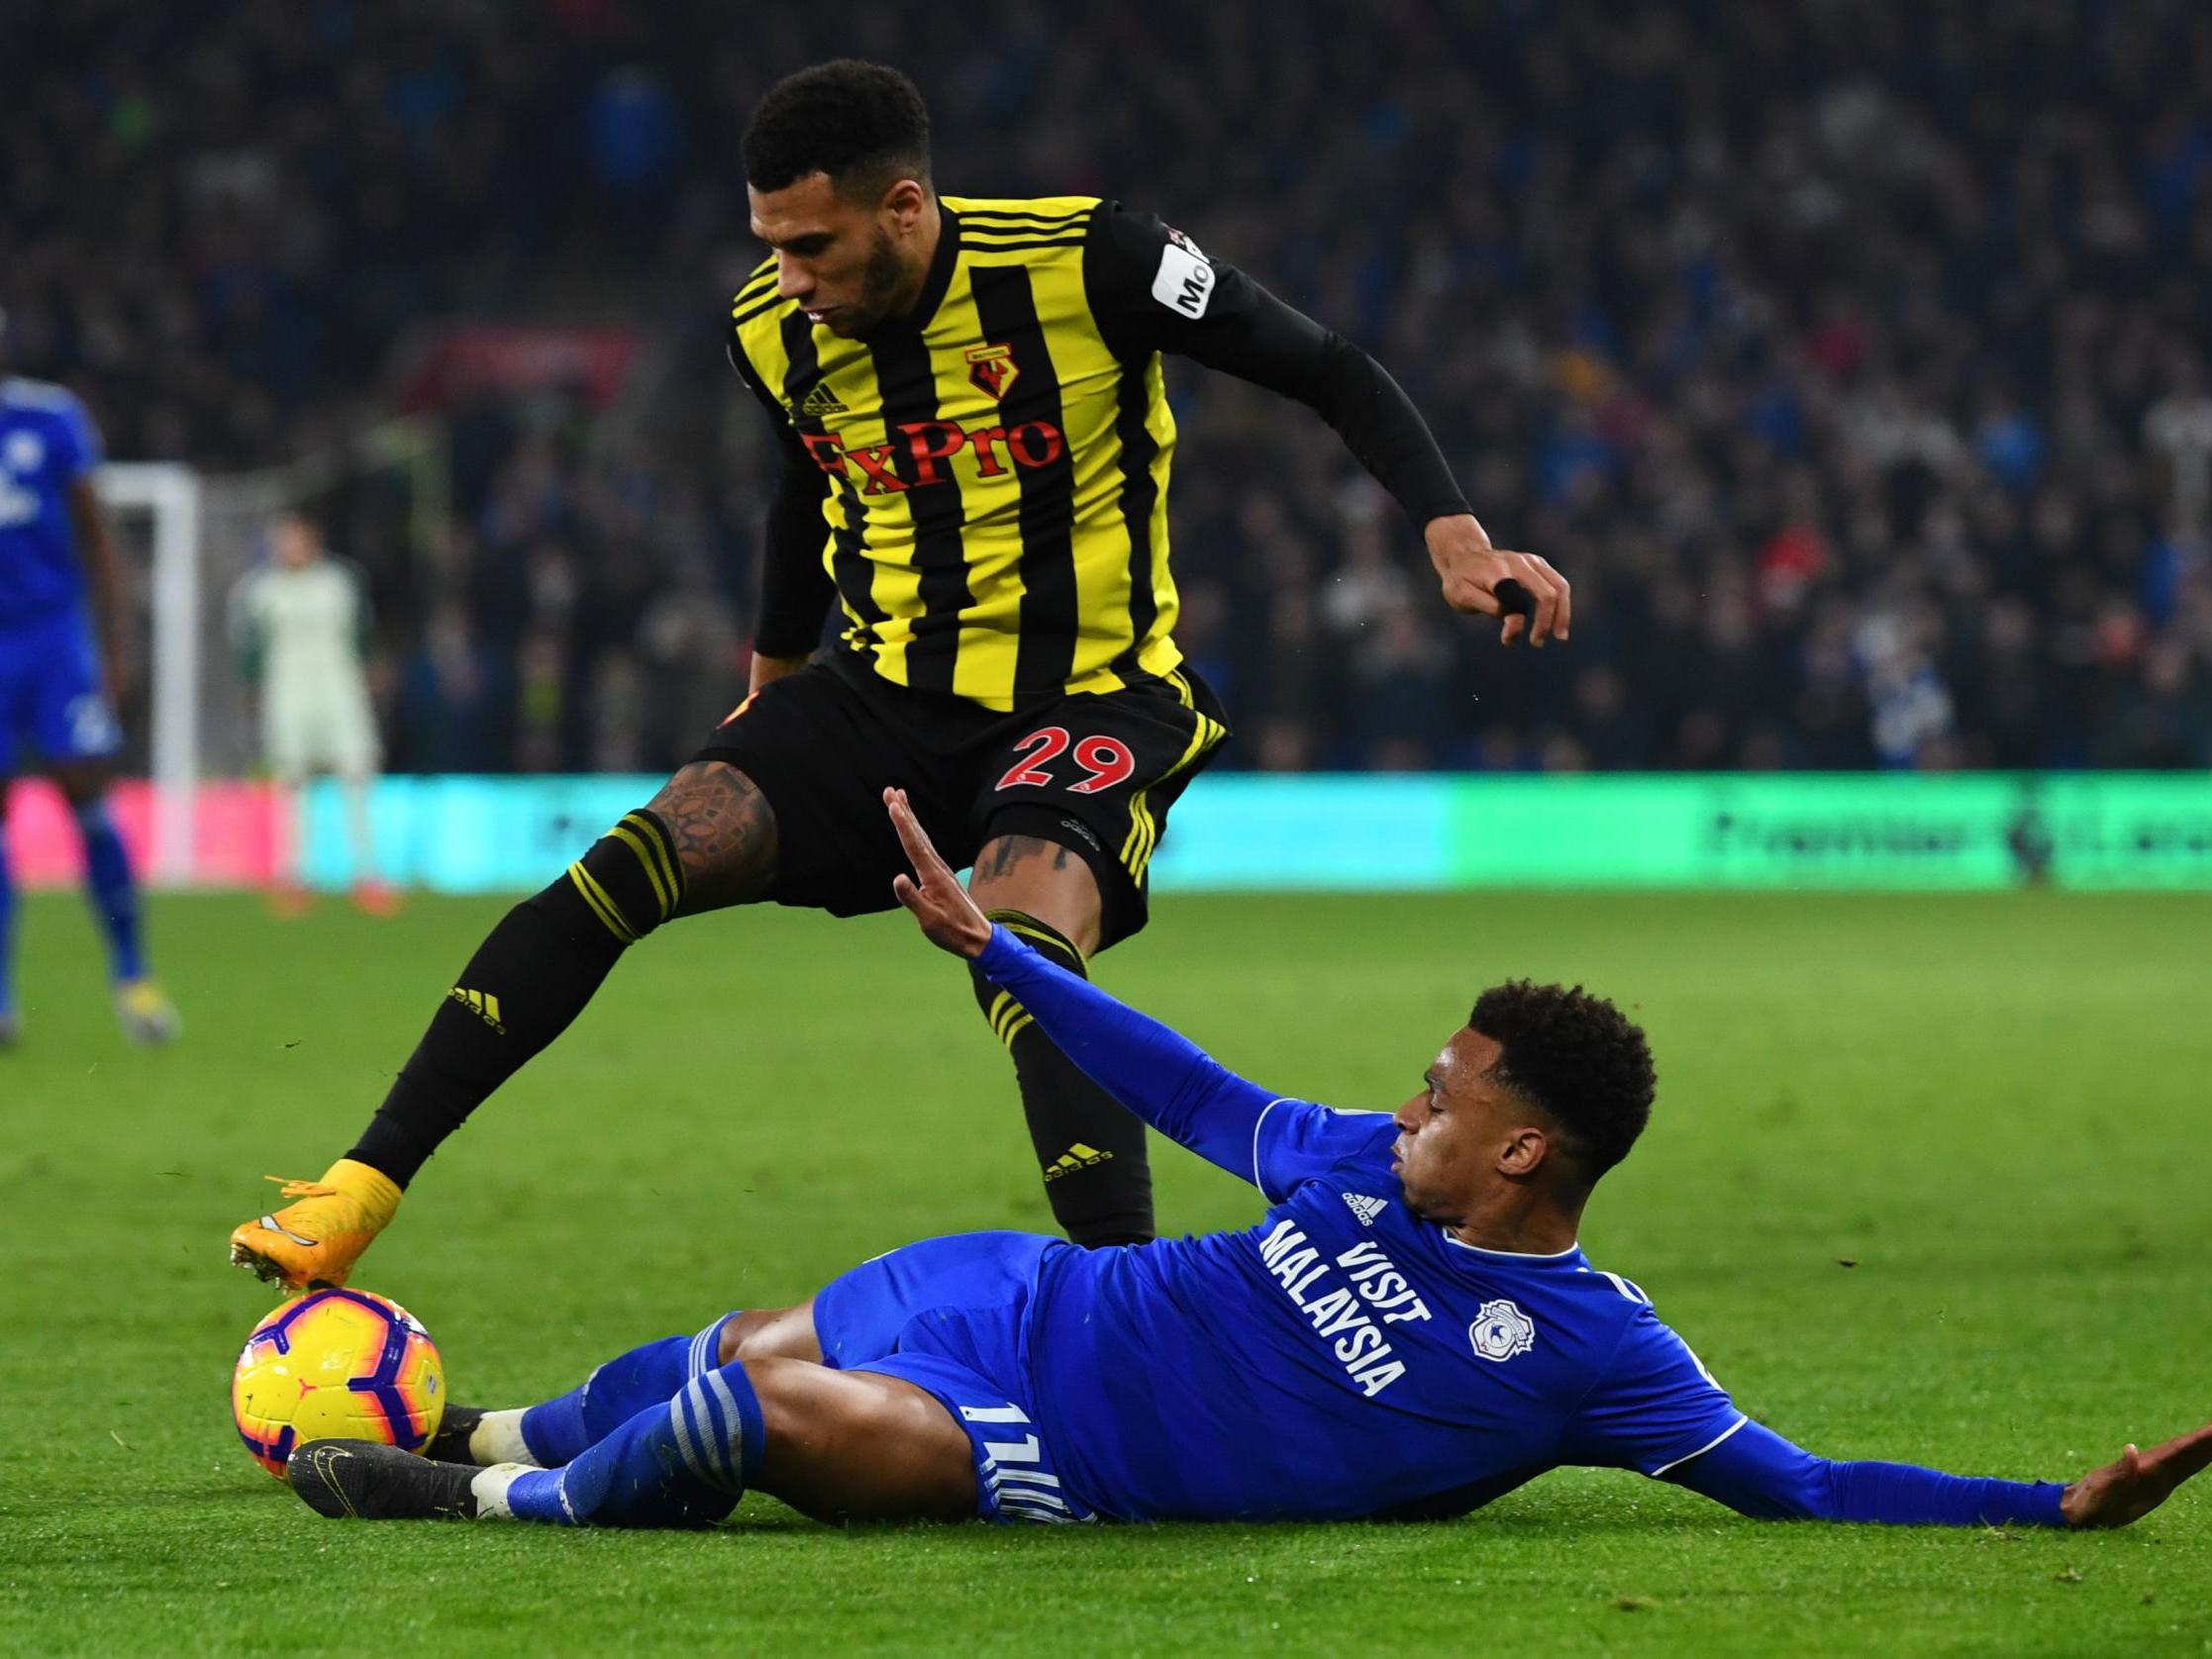 Image result for deeney cardiff 1-5 watford 2019 getty